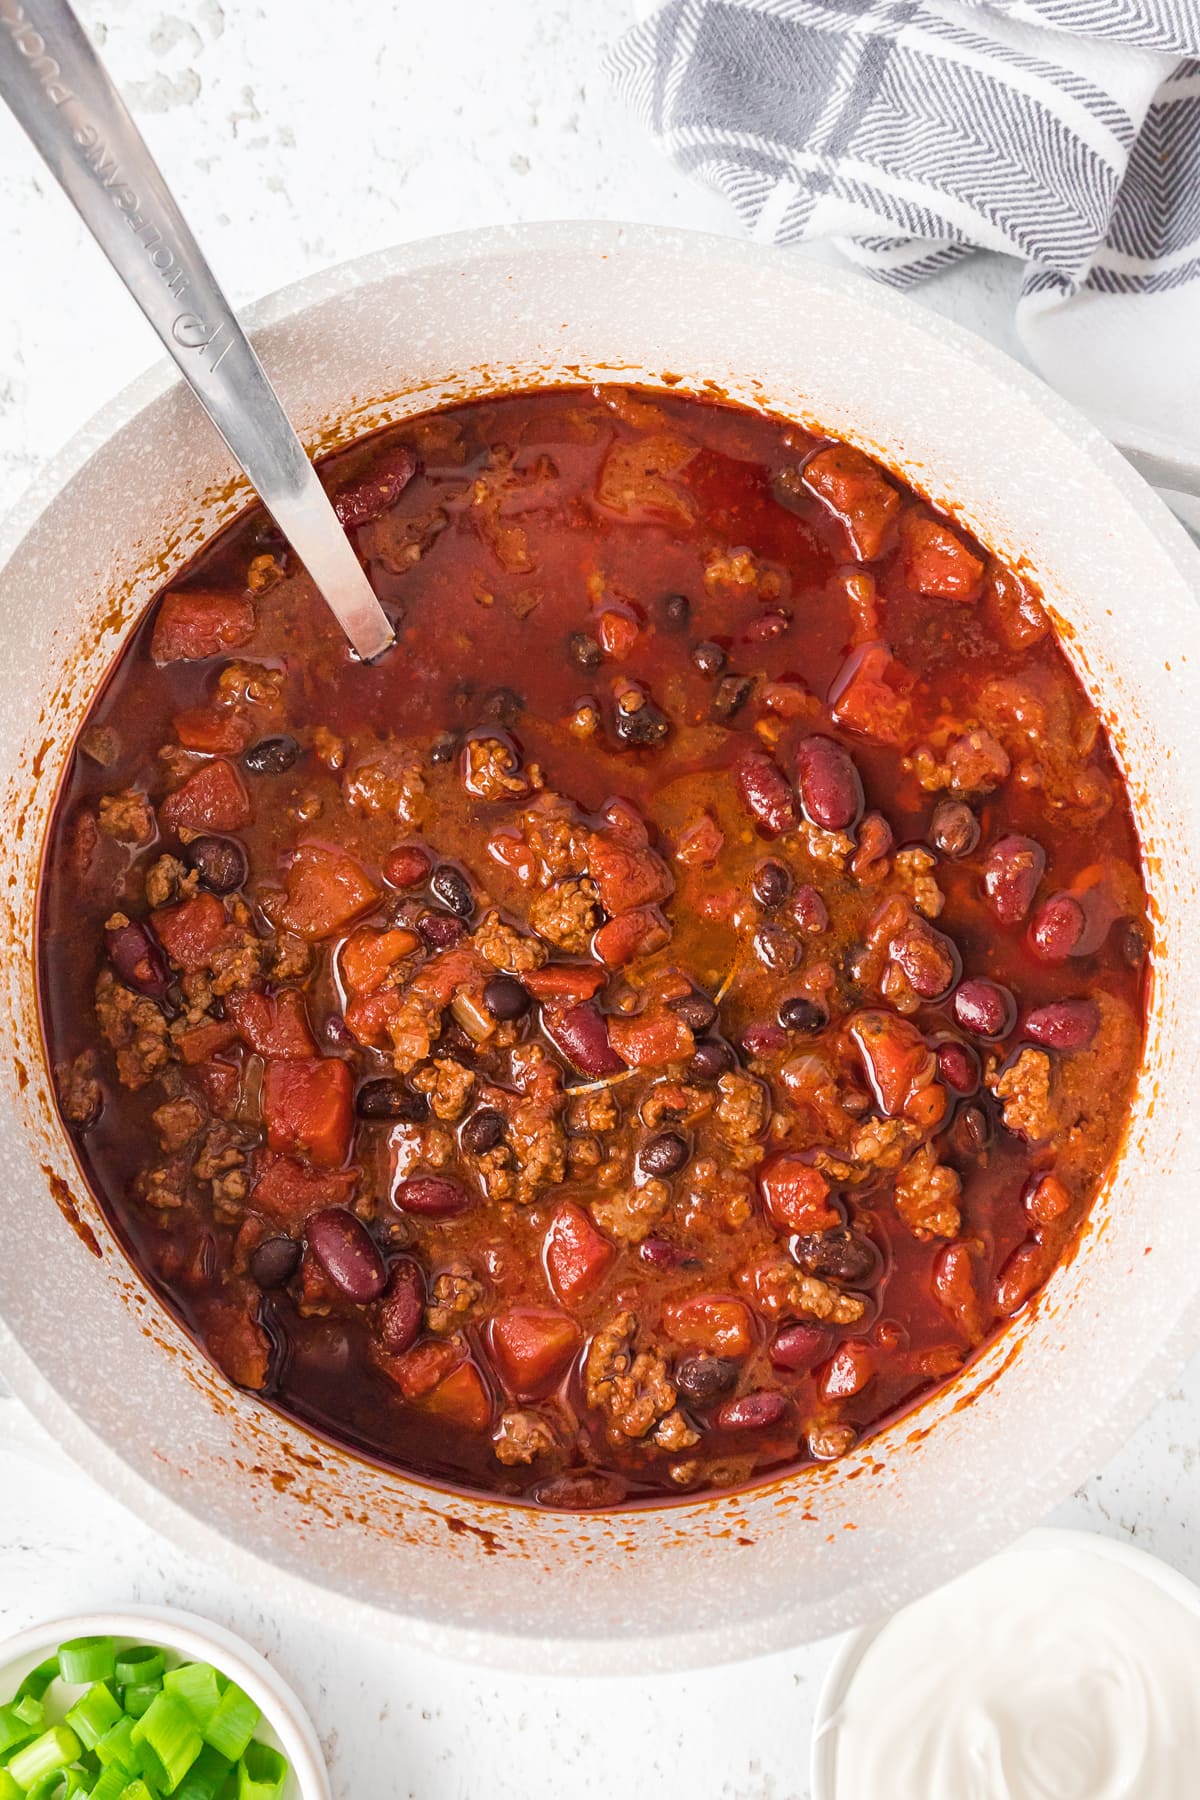 A finished pot of easy chili.